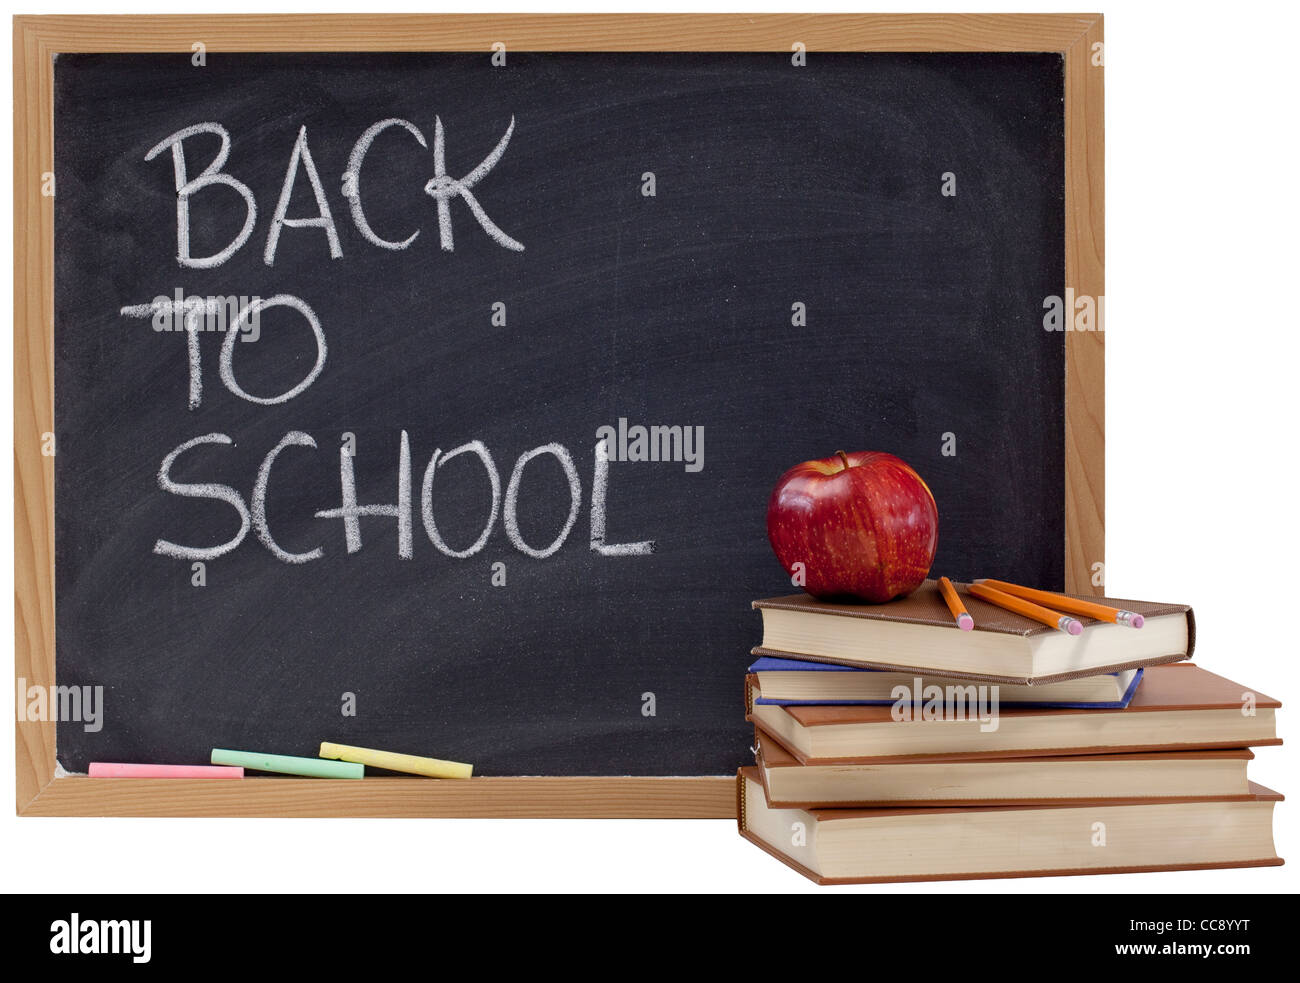 back to school concept - white chalk handwriting on blackboard, stack of old books, red apple and yellow pencils Stock Photo